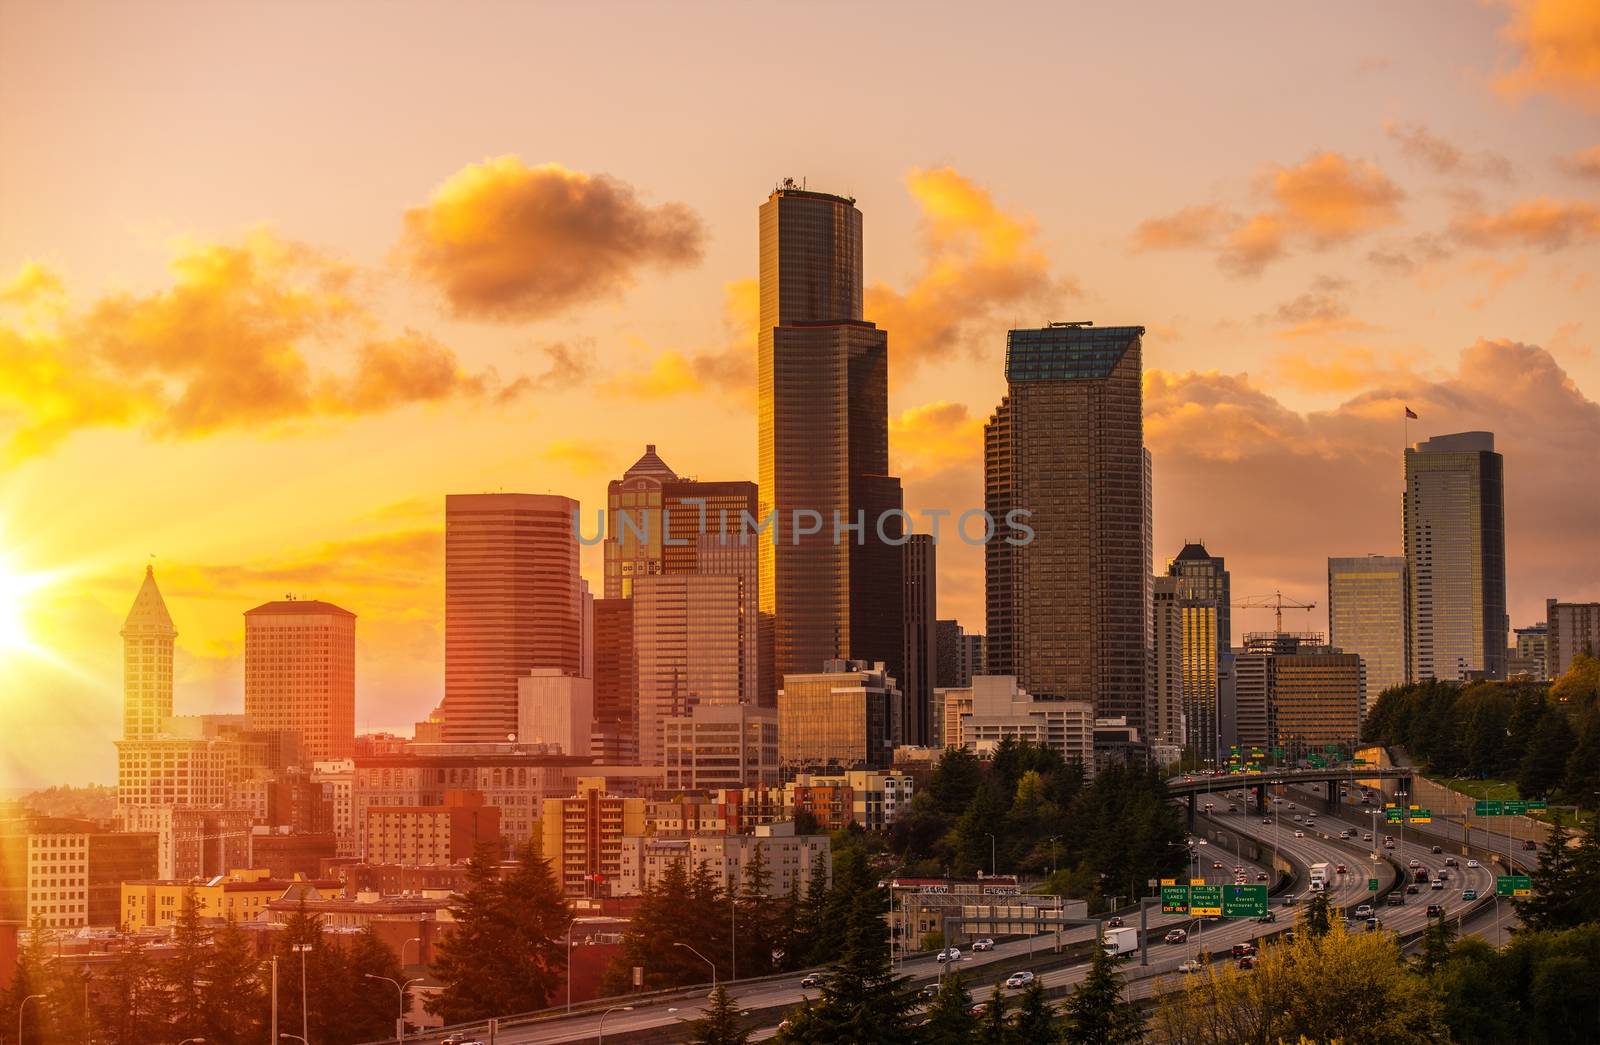 Seattle Scenic Sunset by welcomia